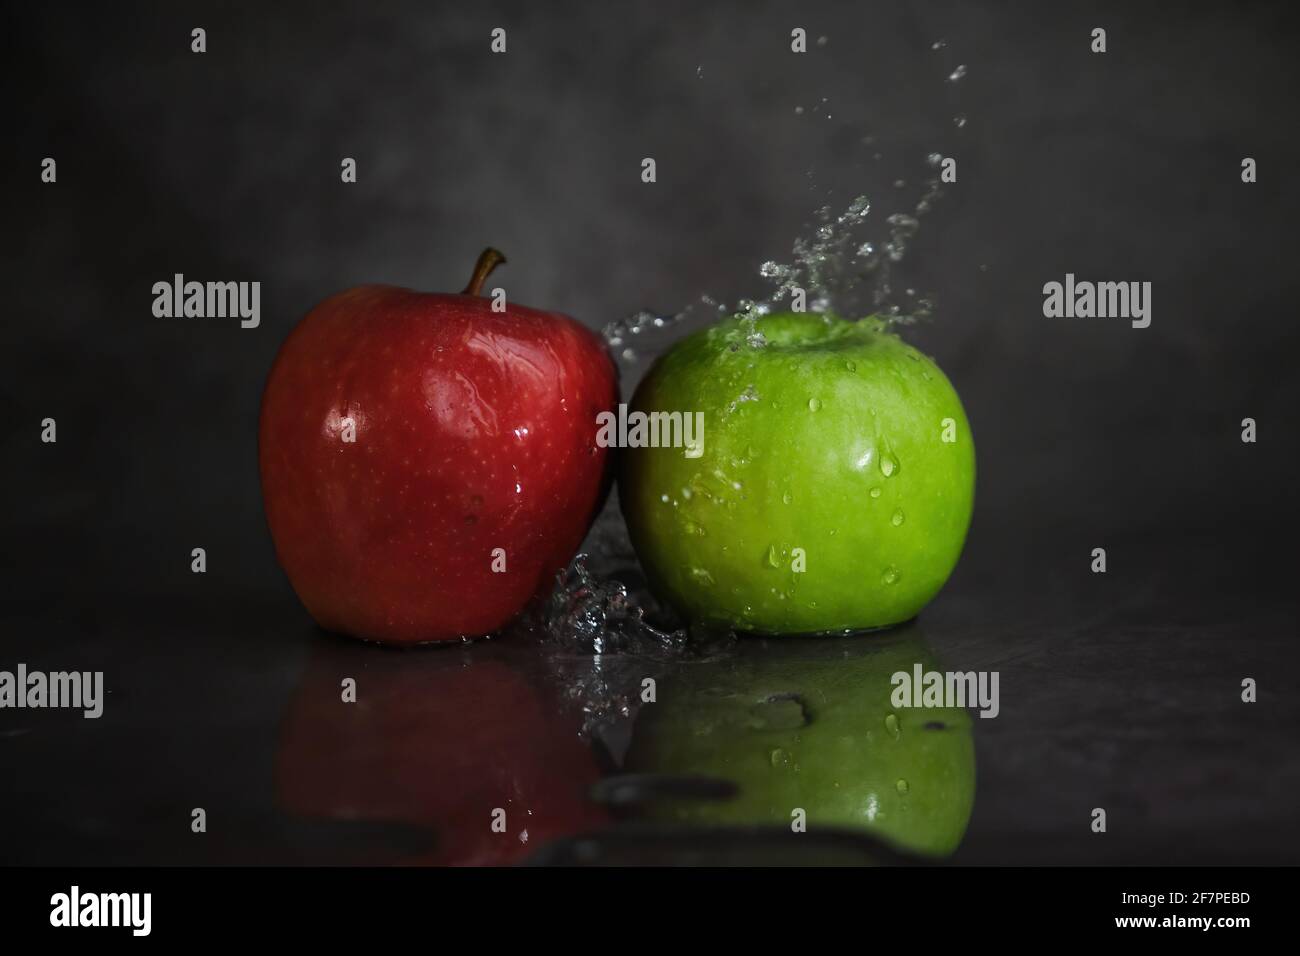 red and green apples in splashes of water Stock Photo